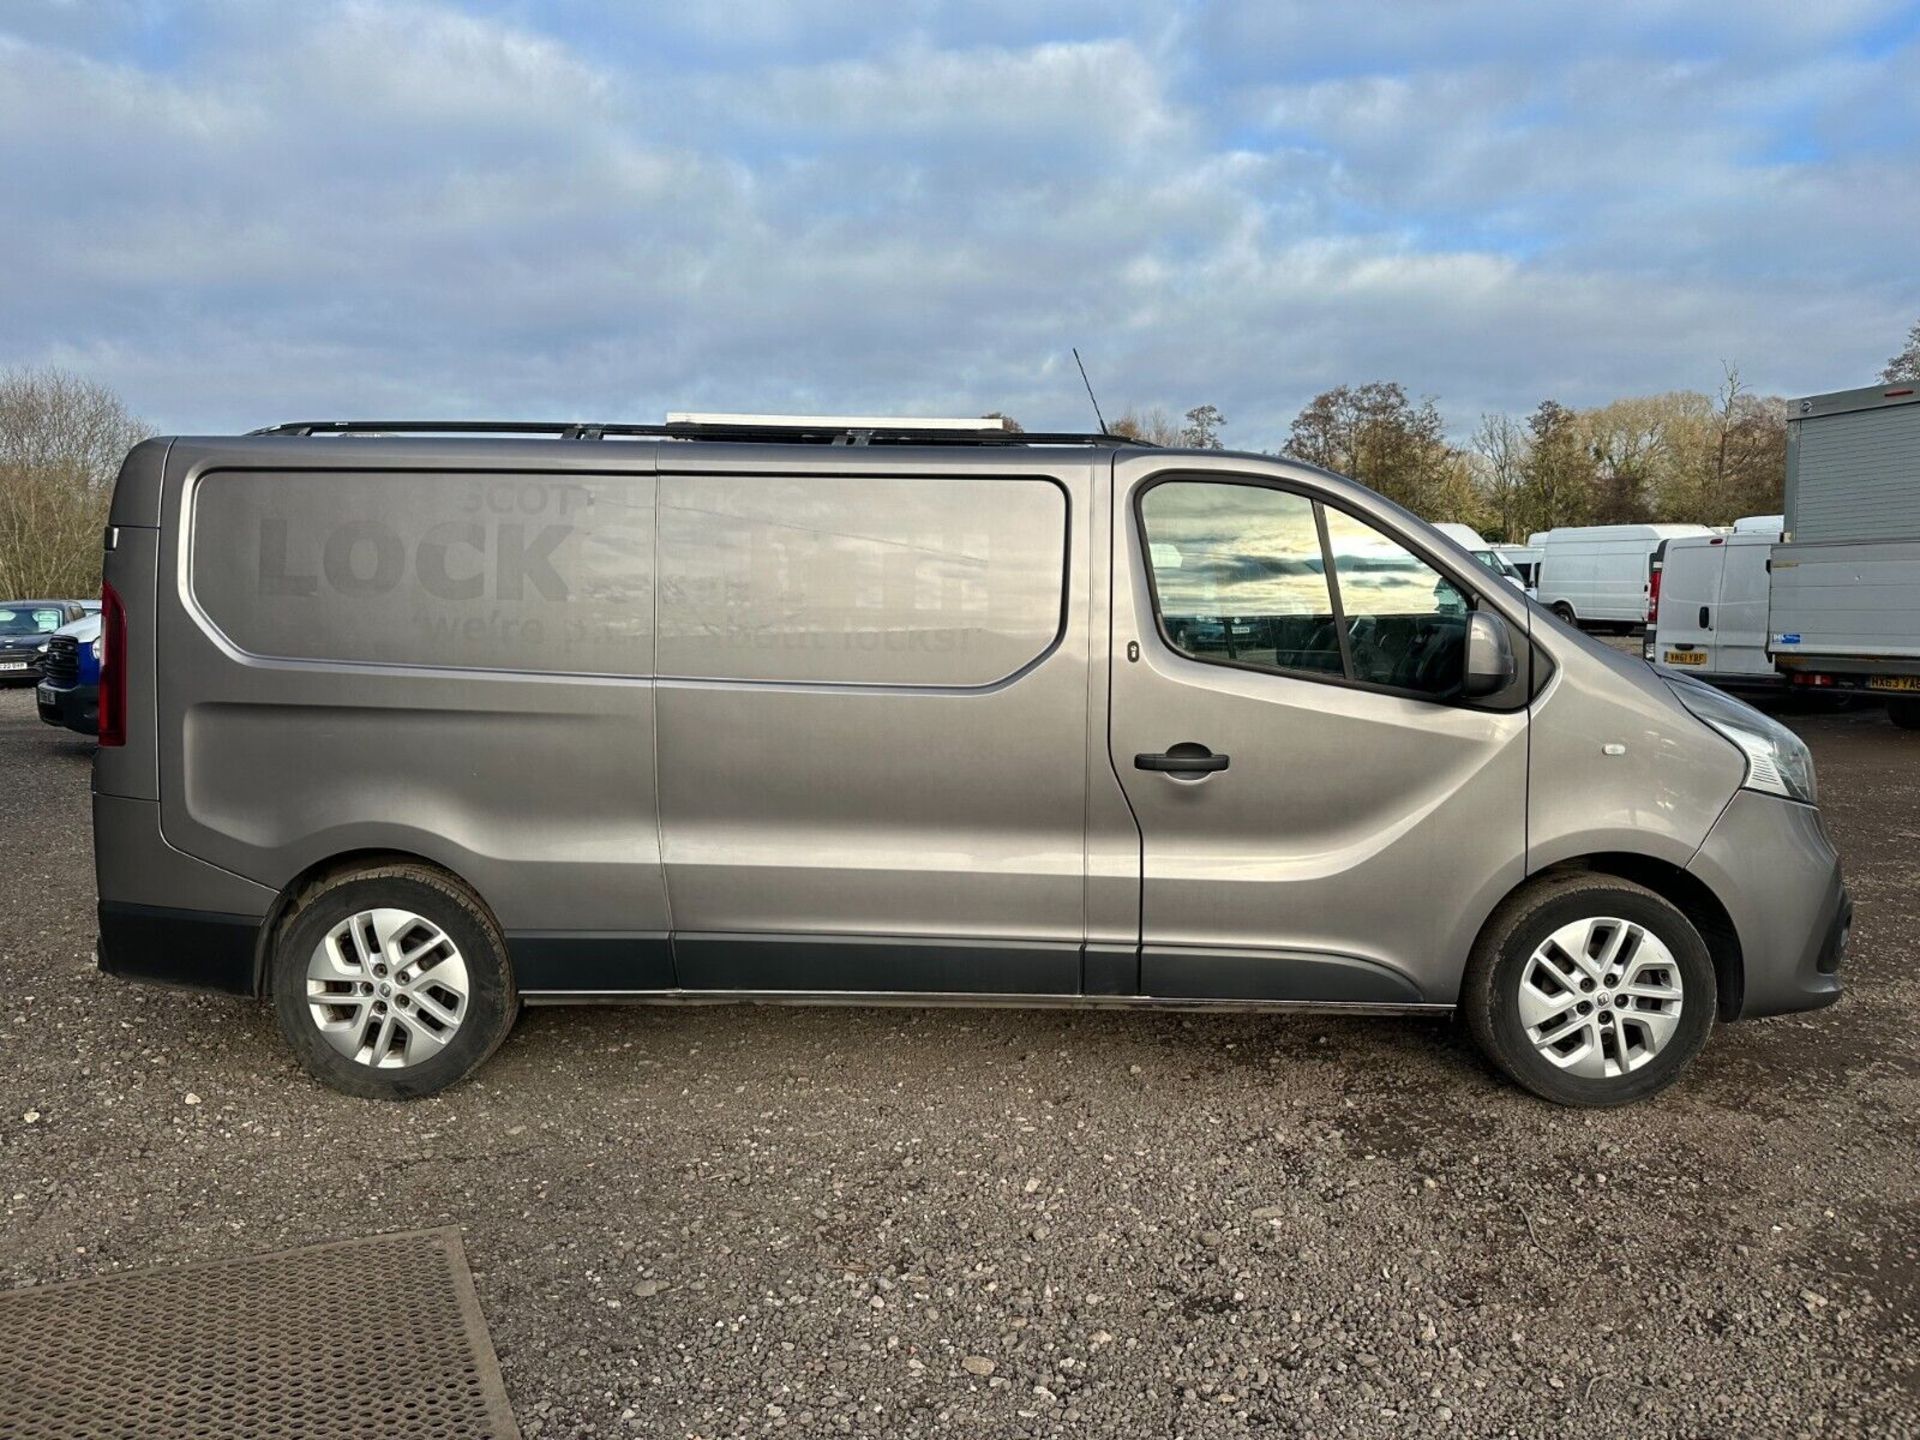 >>--NO VAT ON HAMMER--<< RENAULT TRAFIC REVIVAL: CLEAN BODY, INTERIOR - REPAIR OPPORTUNITY